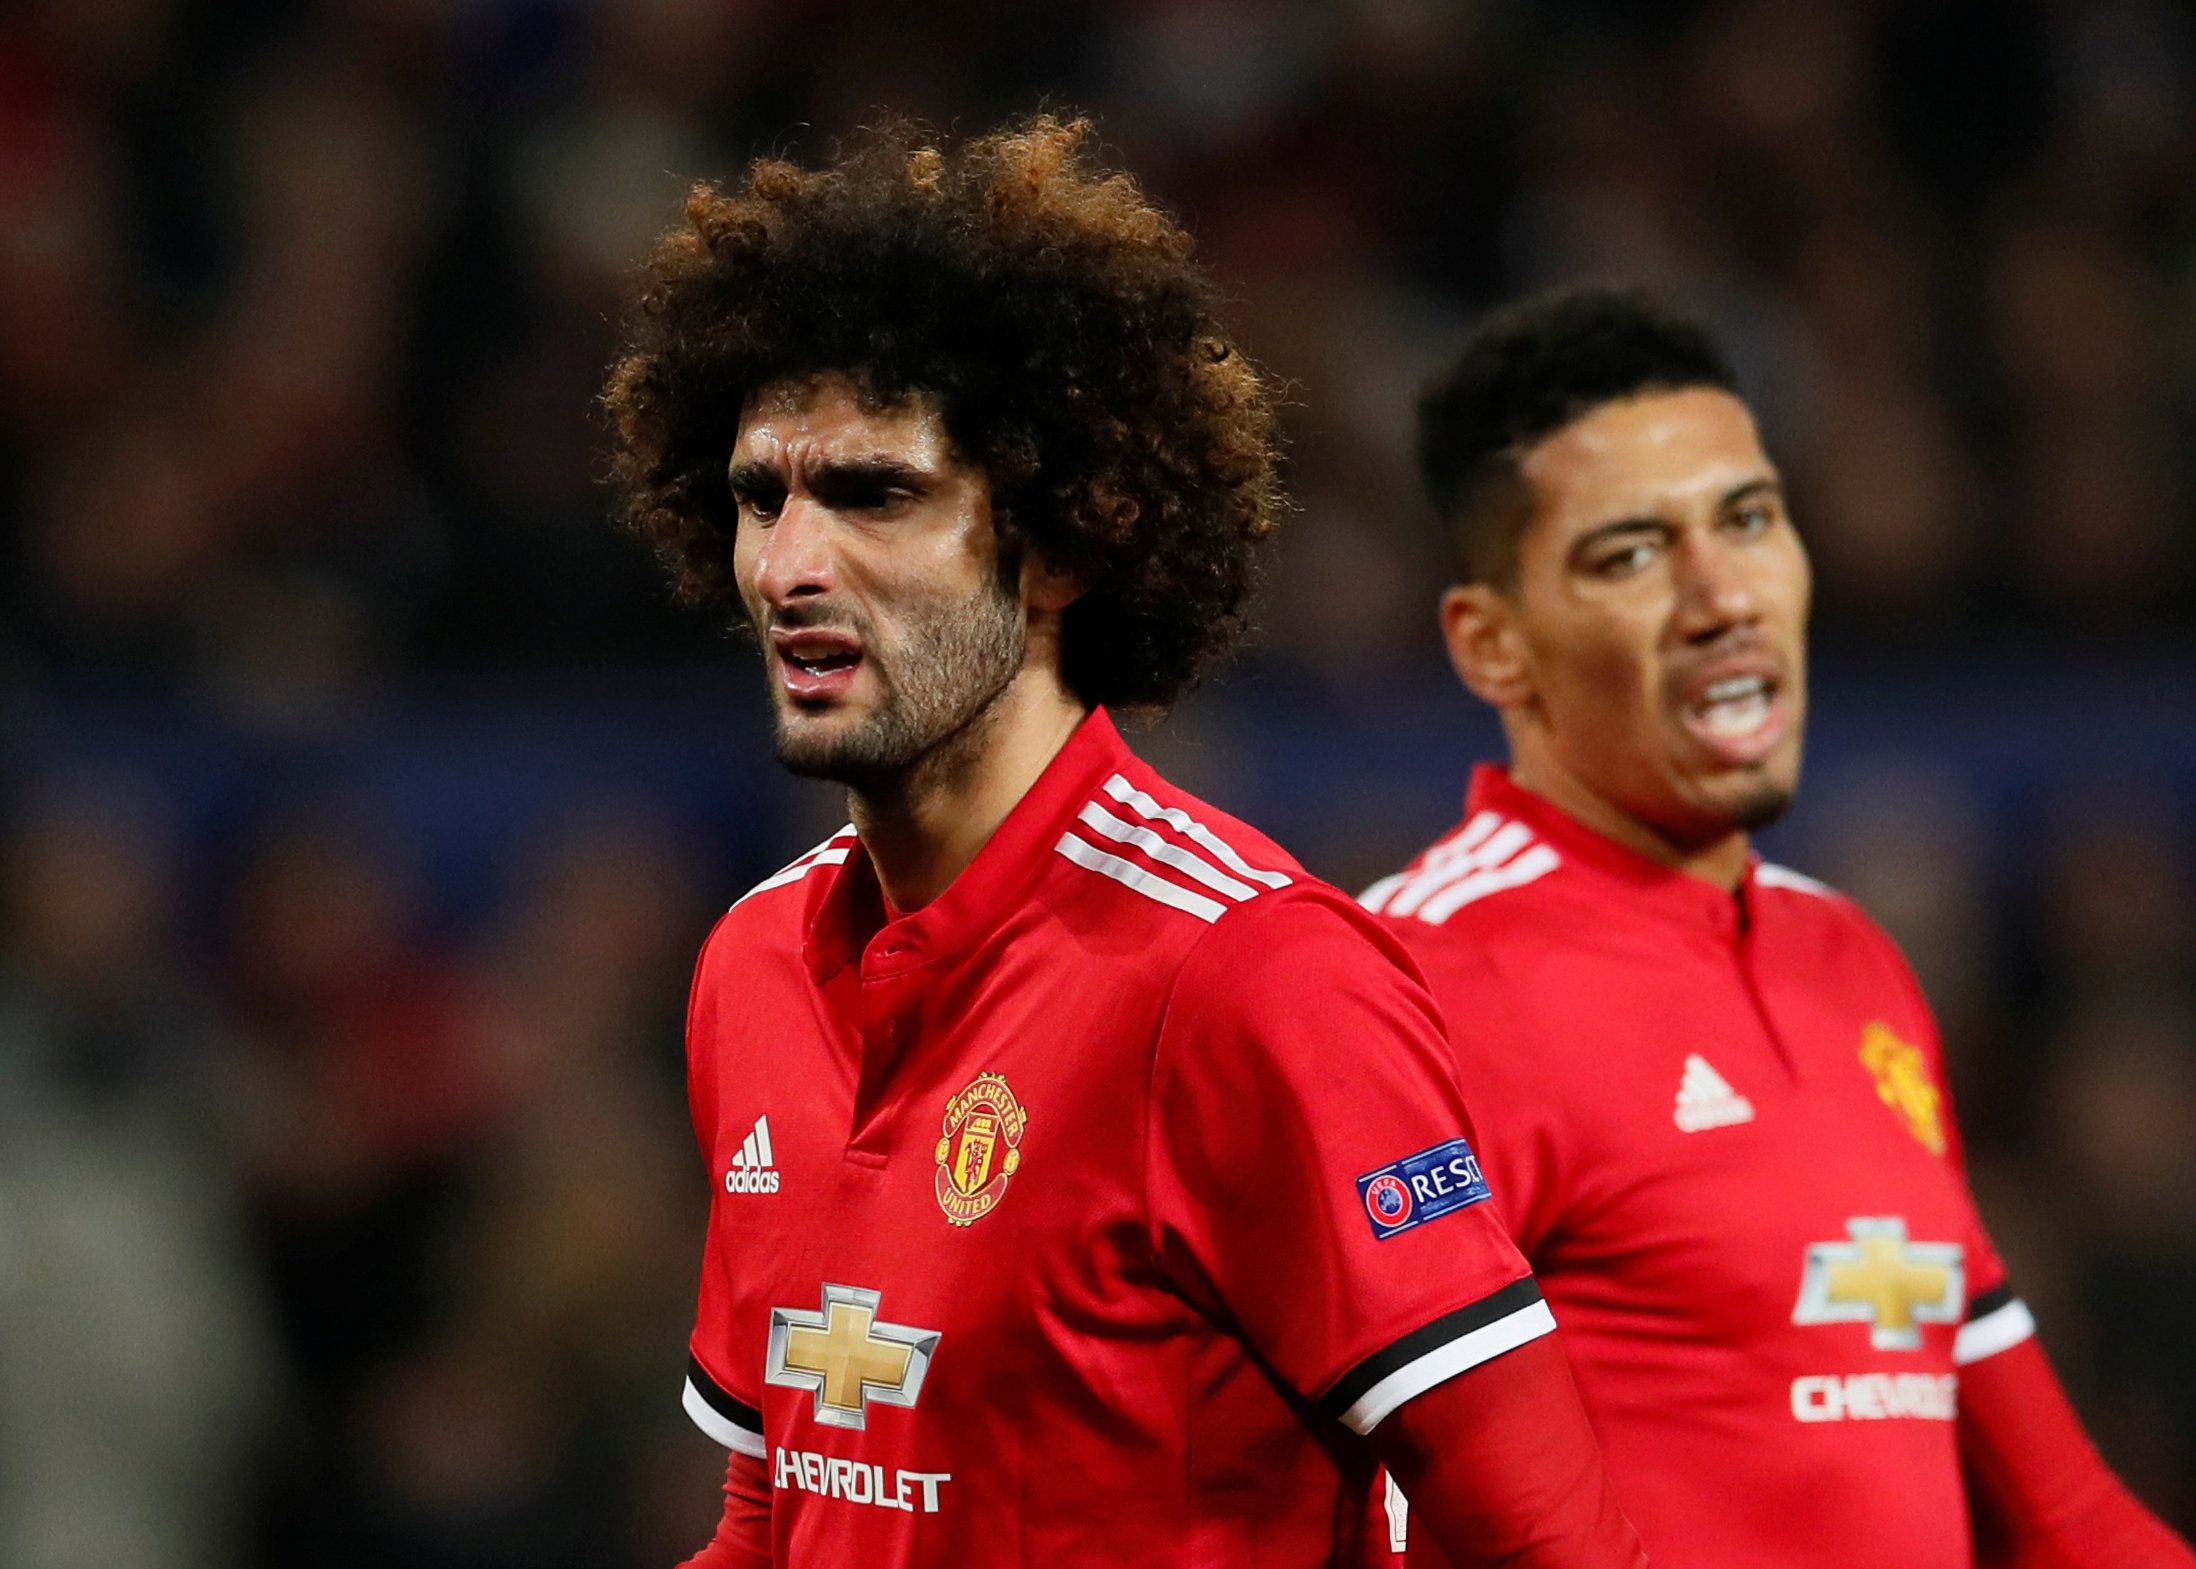 Soccer Football - Champions League Round of 16 Second Leg - Manchester United vs Sevilla - Old Trafford, Manchester, Britain - March 13, 2018   Manchester United's Marouane Fellaini and Chris Smalling       REUTERS/David Klein